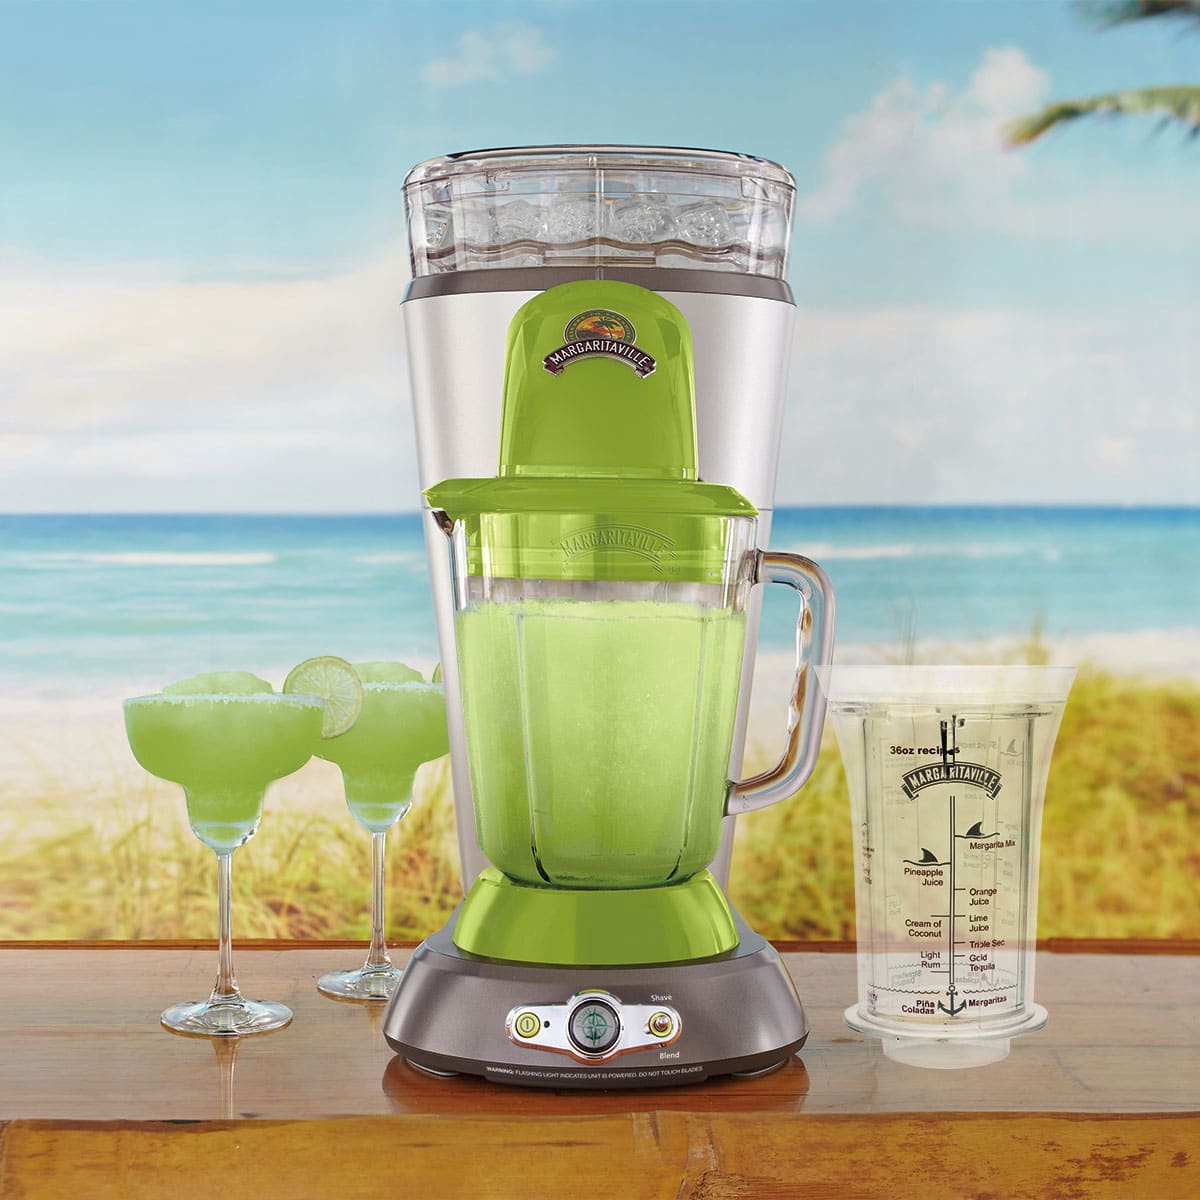 Travel Gifts for Travelers: Frozen Drink Maker